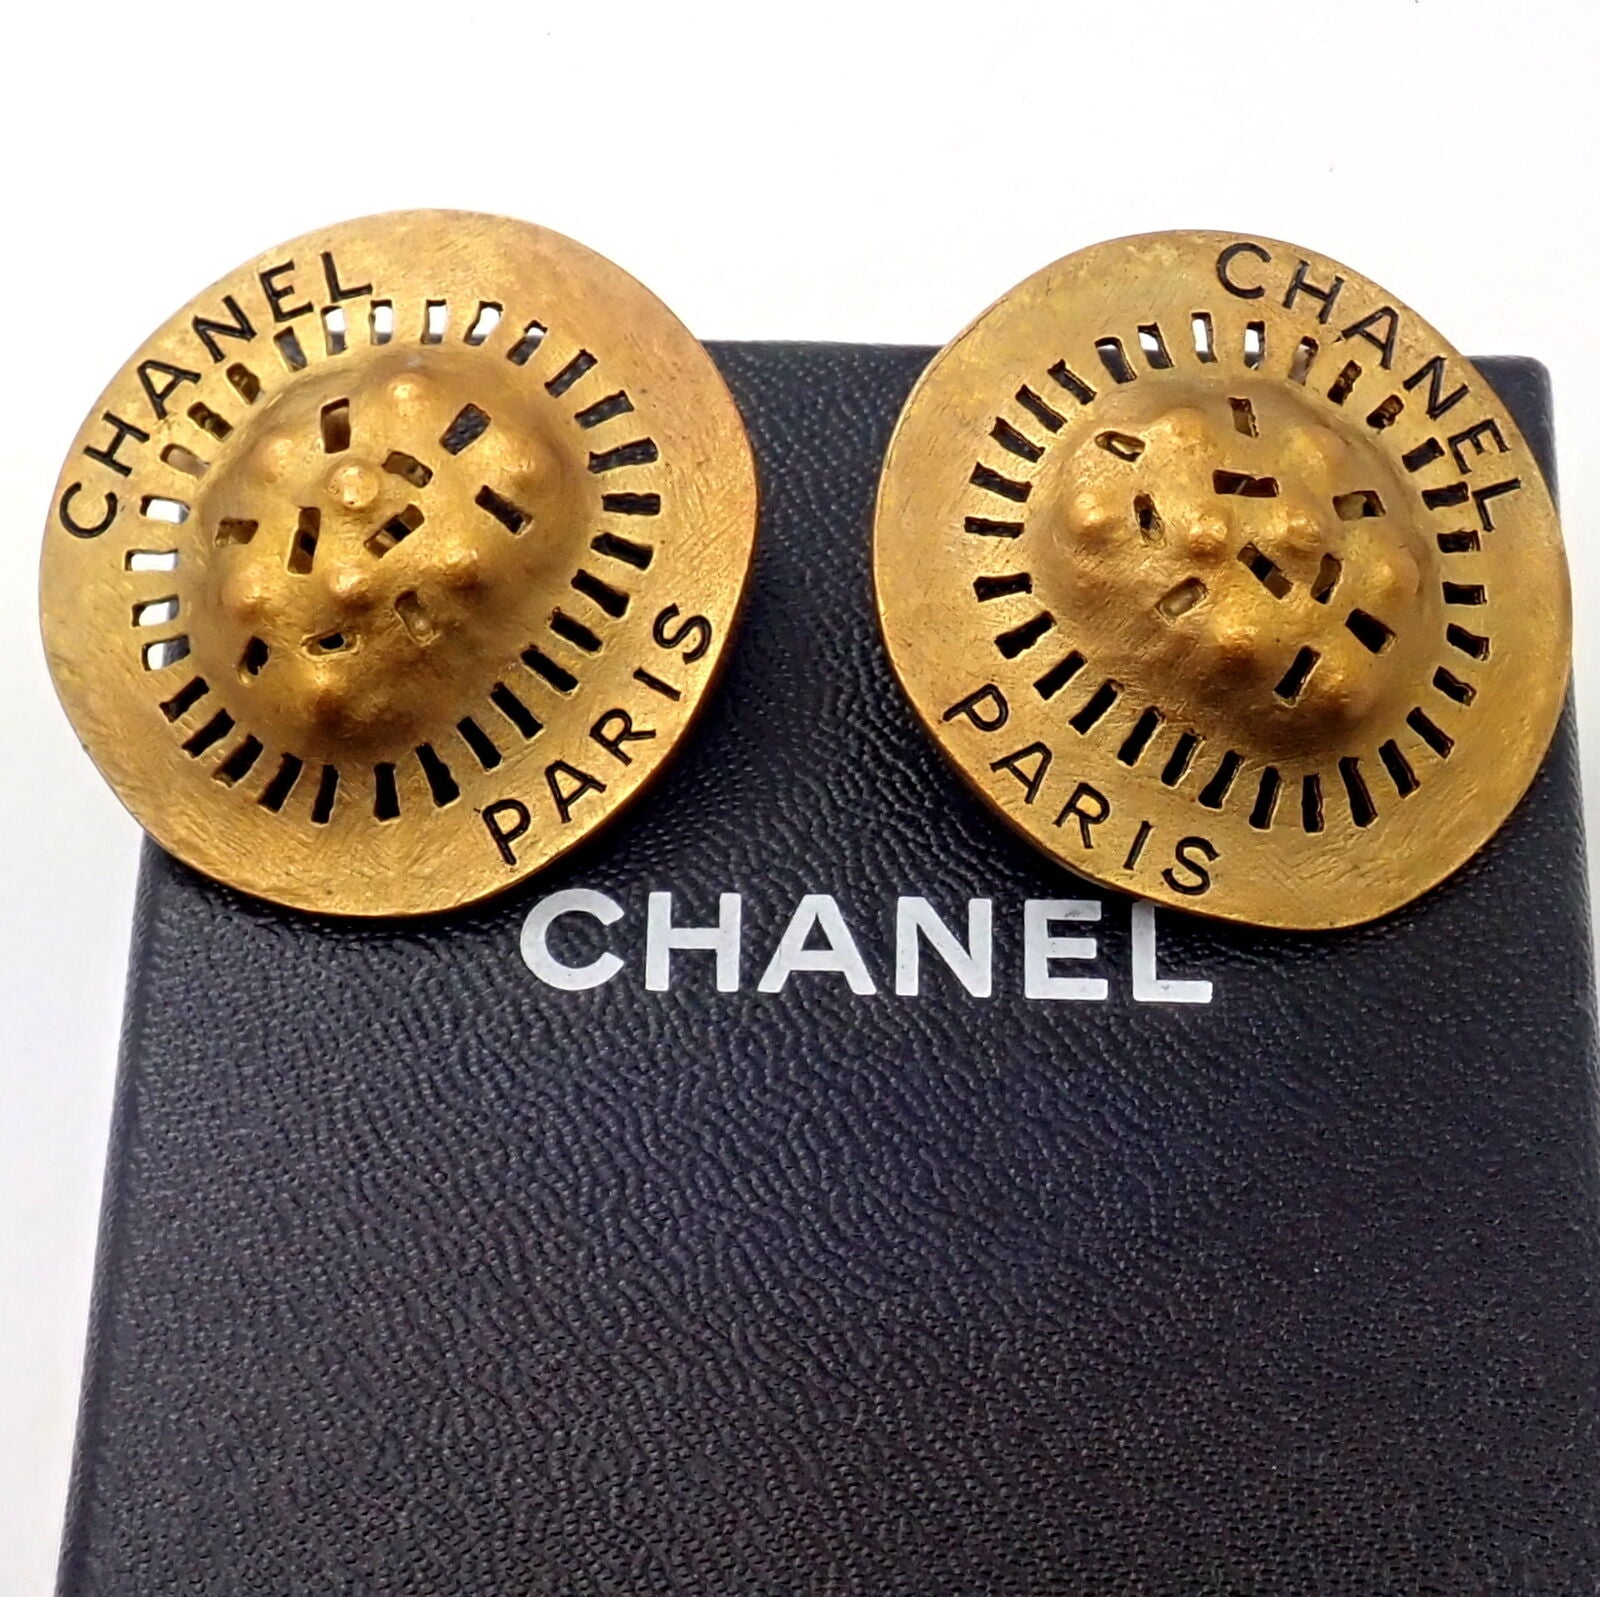 Rare! Vintage Chanel Paris France Medallion Earrings 1994 Fall Collection